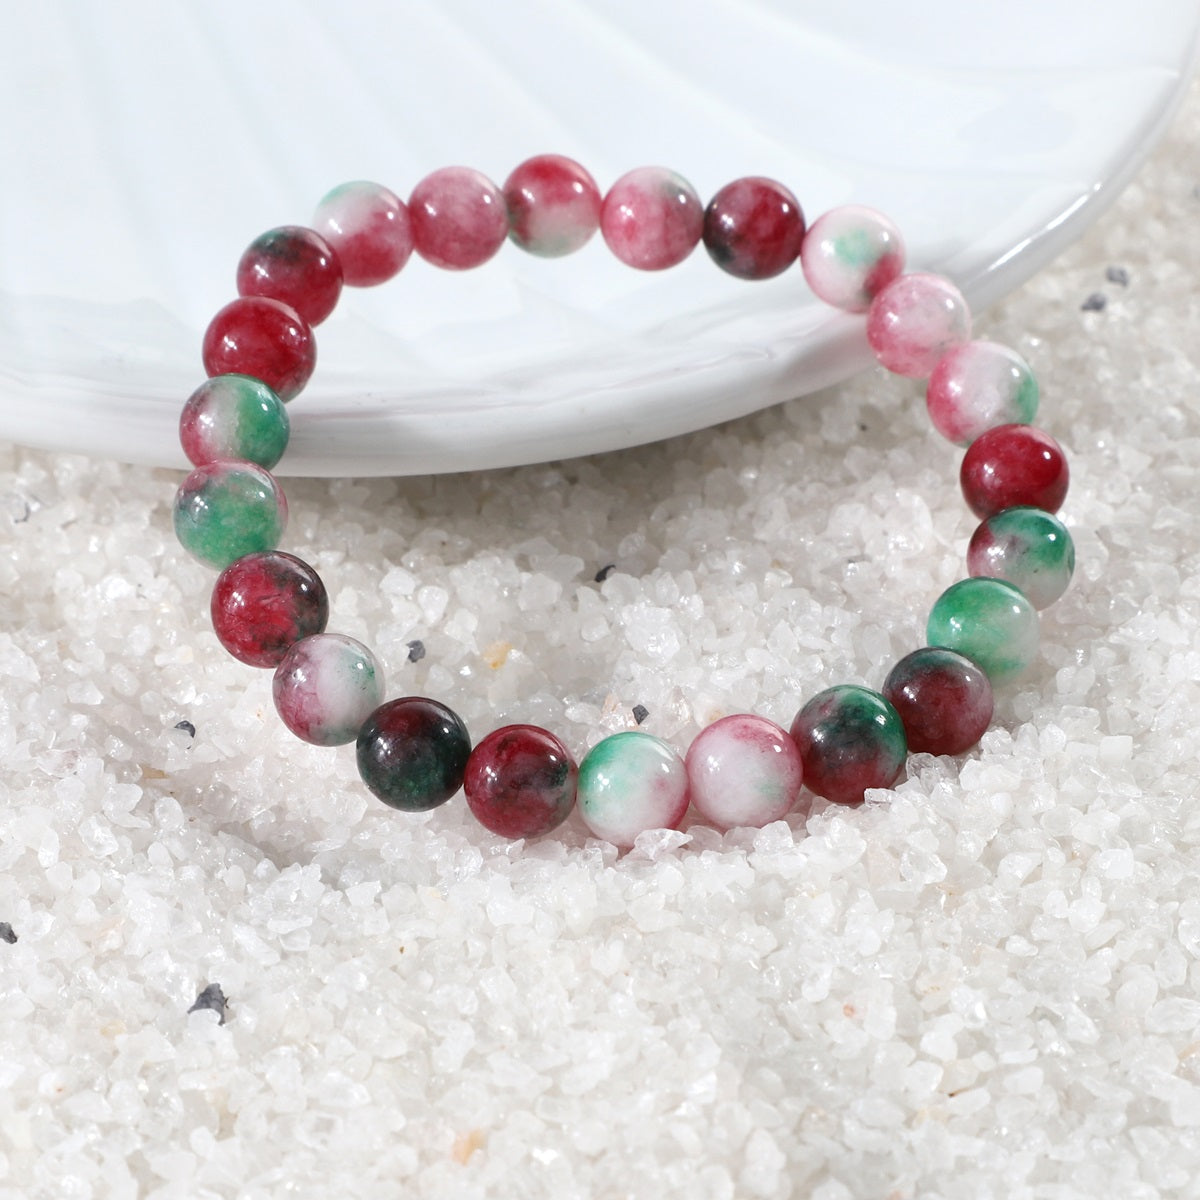 Side view of the Watermelon Quartz Stretch Bracelet, showcasing its comfortable fit and the craftsmanship of the 8mm smooth round beads for a sophisticated appearance